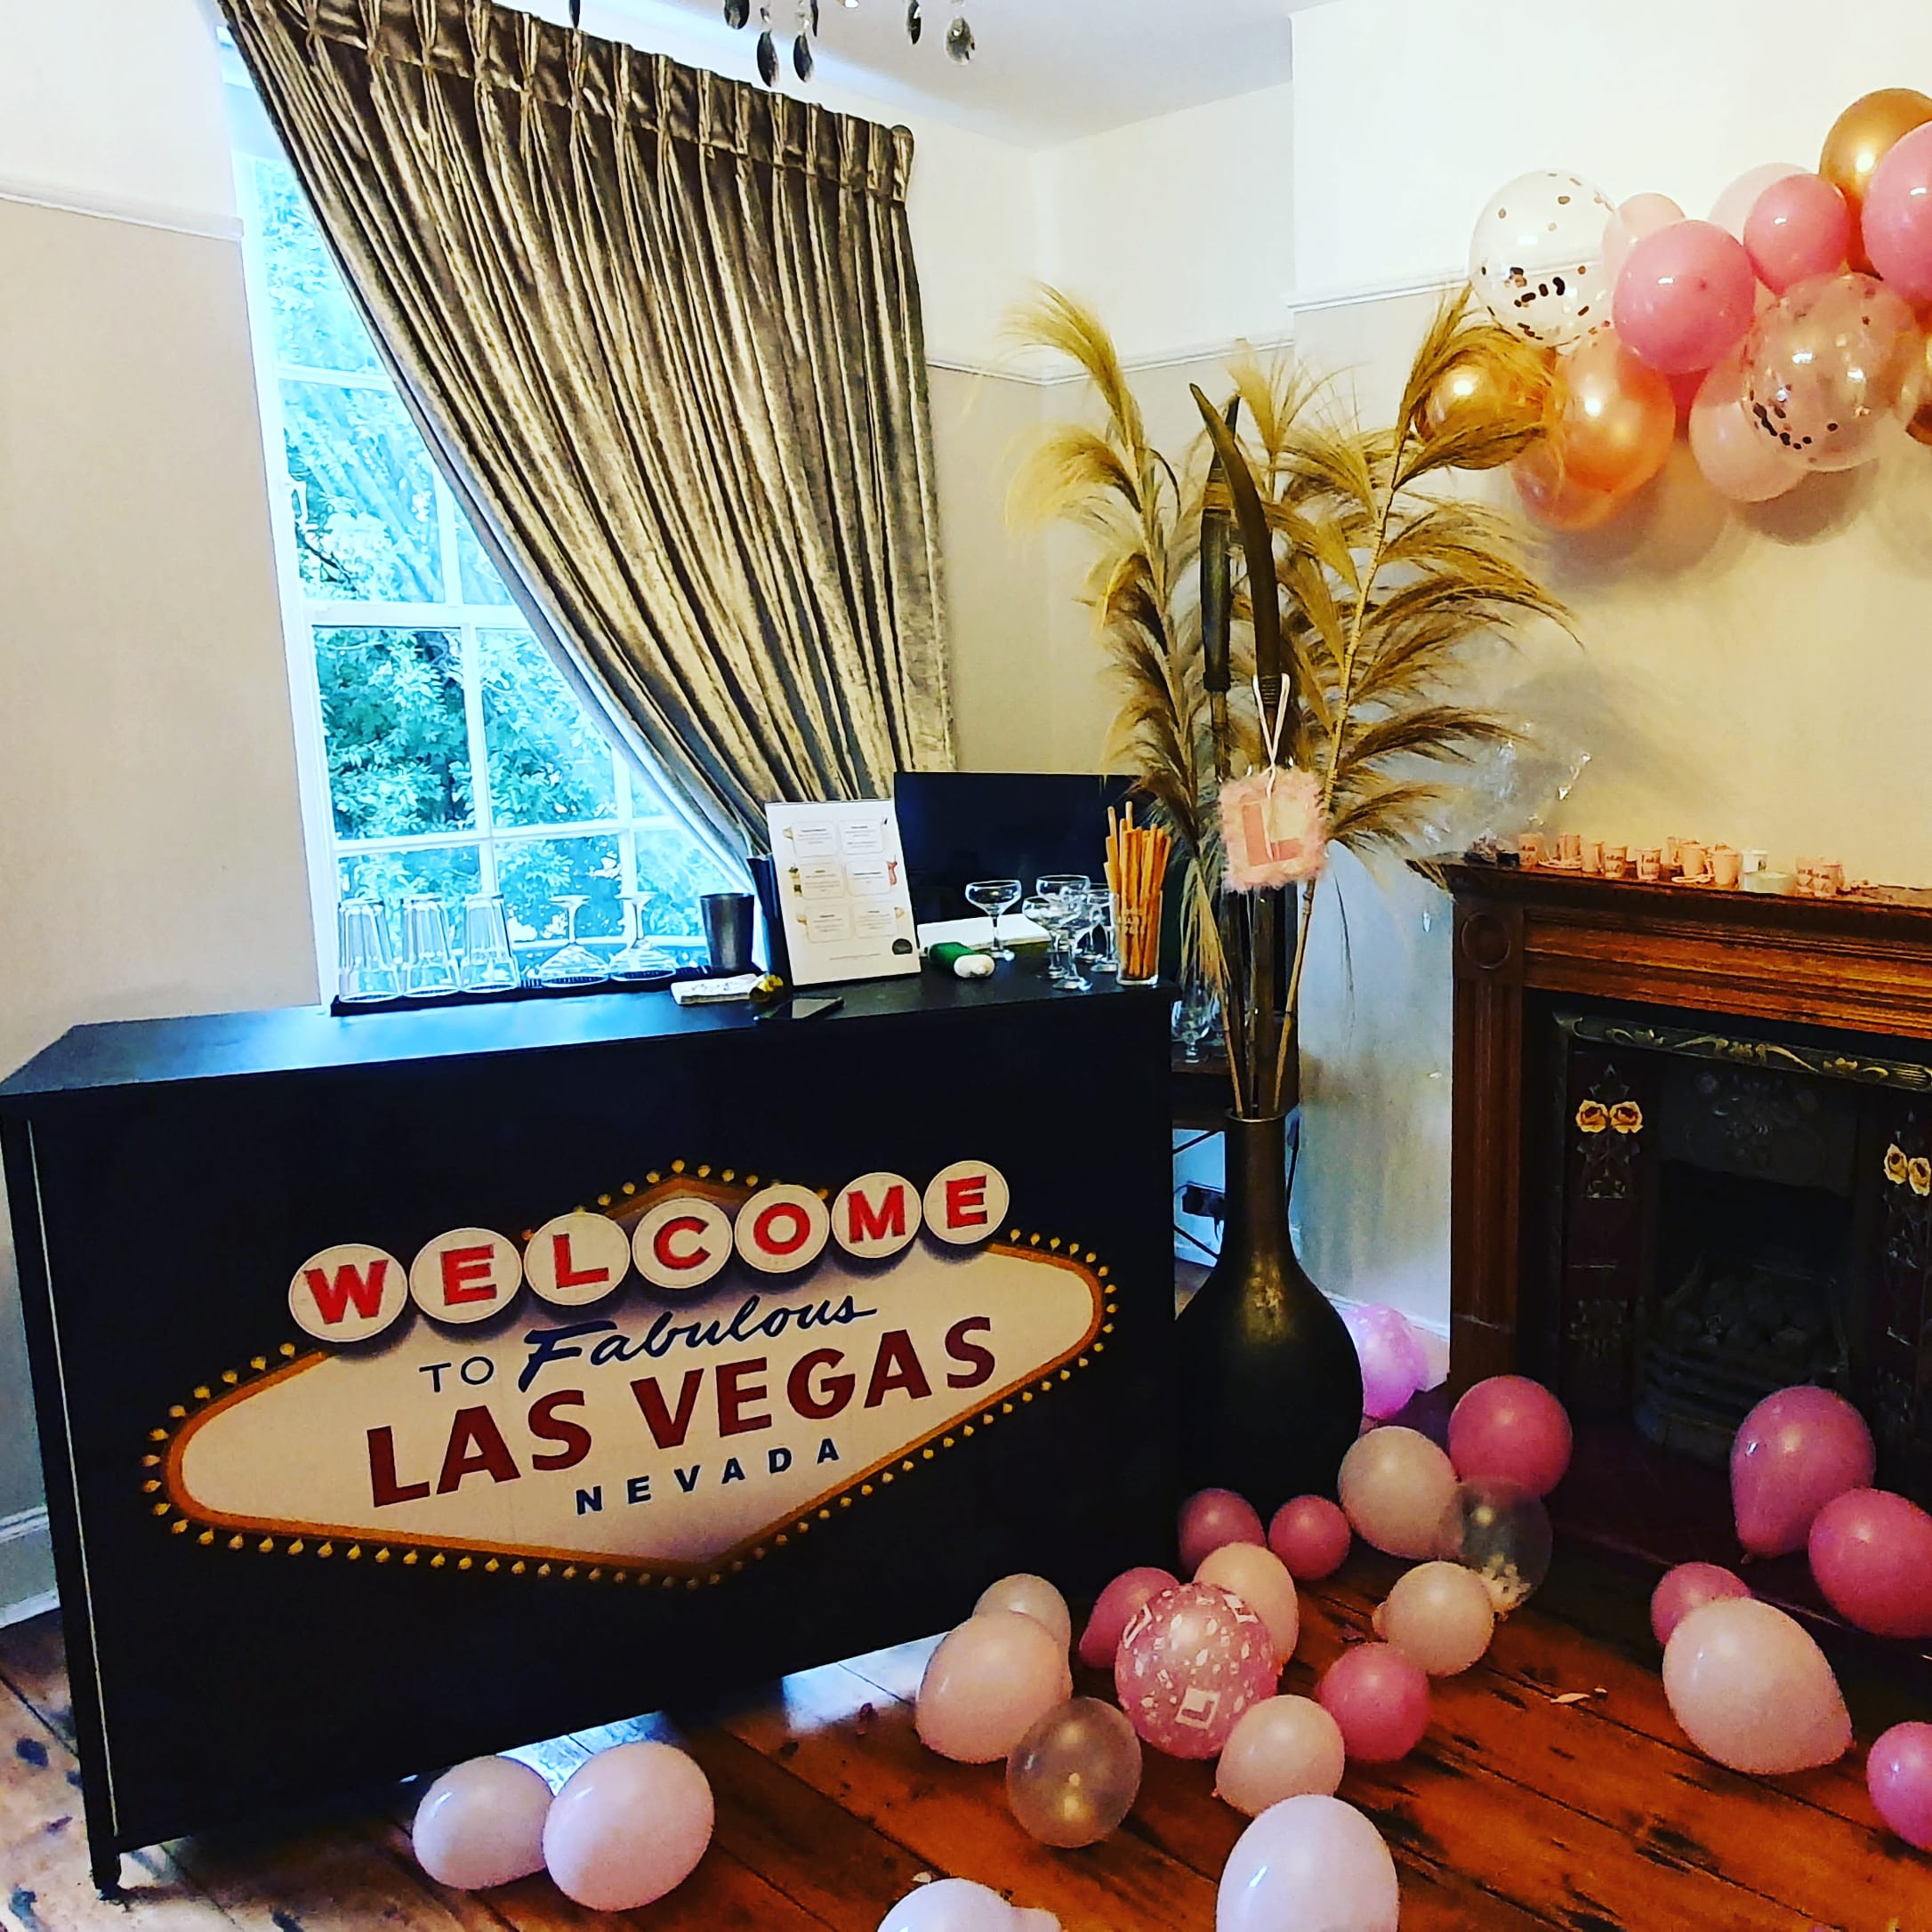 Hen Party Bar Hire Cheshire